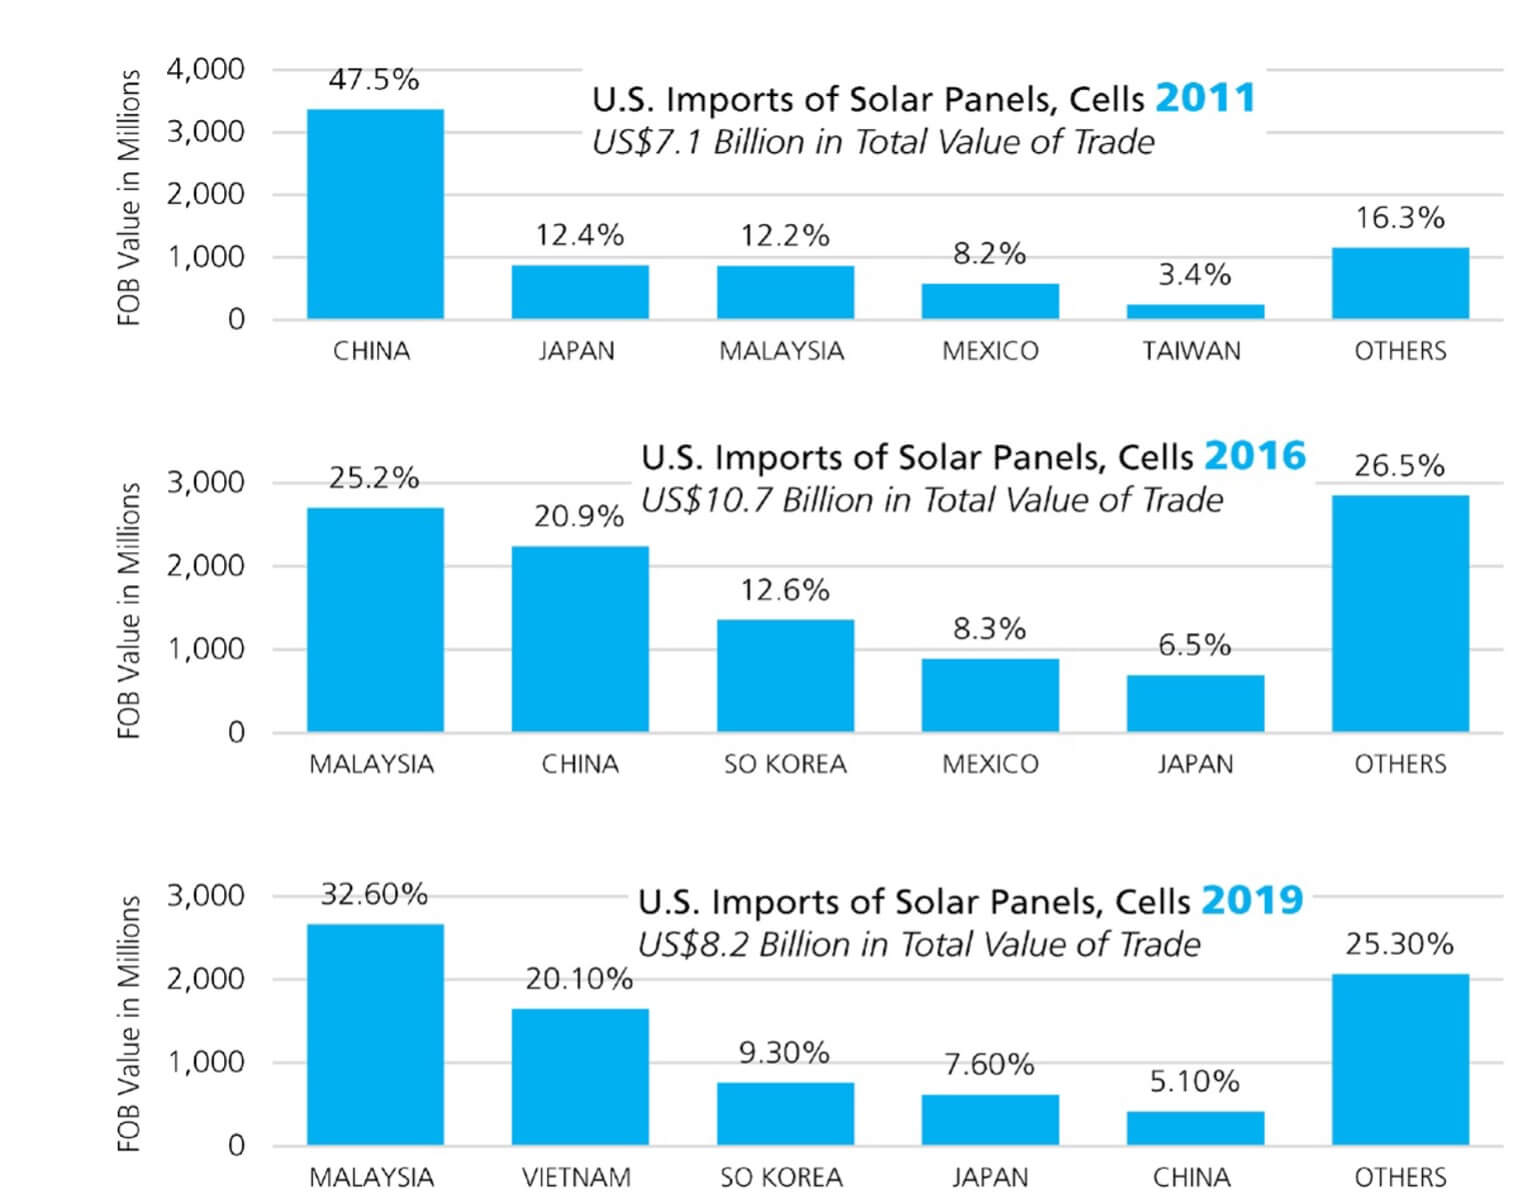 Graphic showing U.S. solar panel imports for 2011, 2016, and 2019 from the top 5 source countries